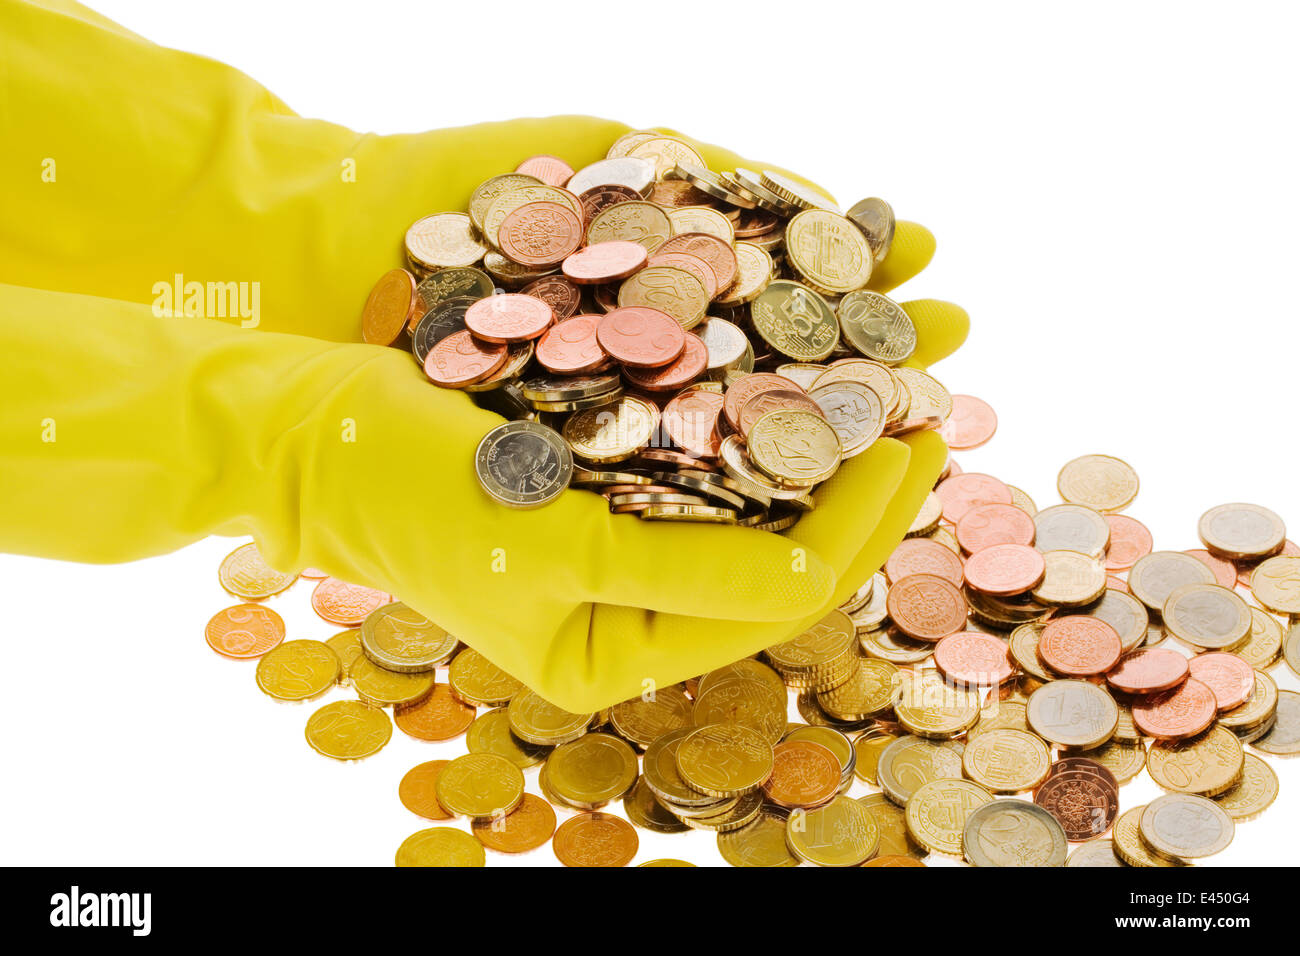 The latex glove of a cleaning lady on a white background. Many Euro coins Stock Photo